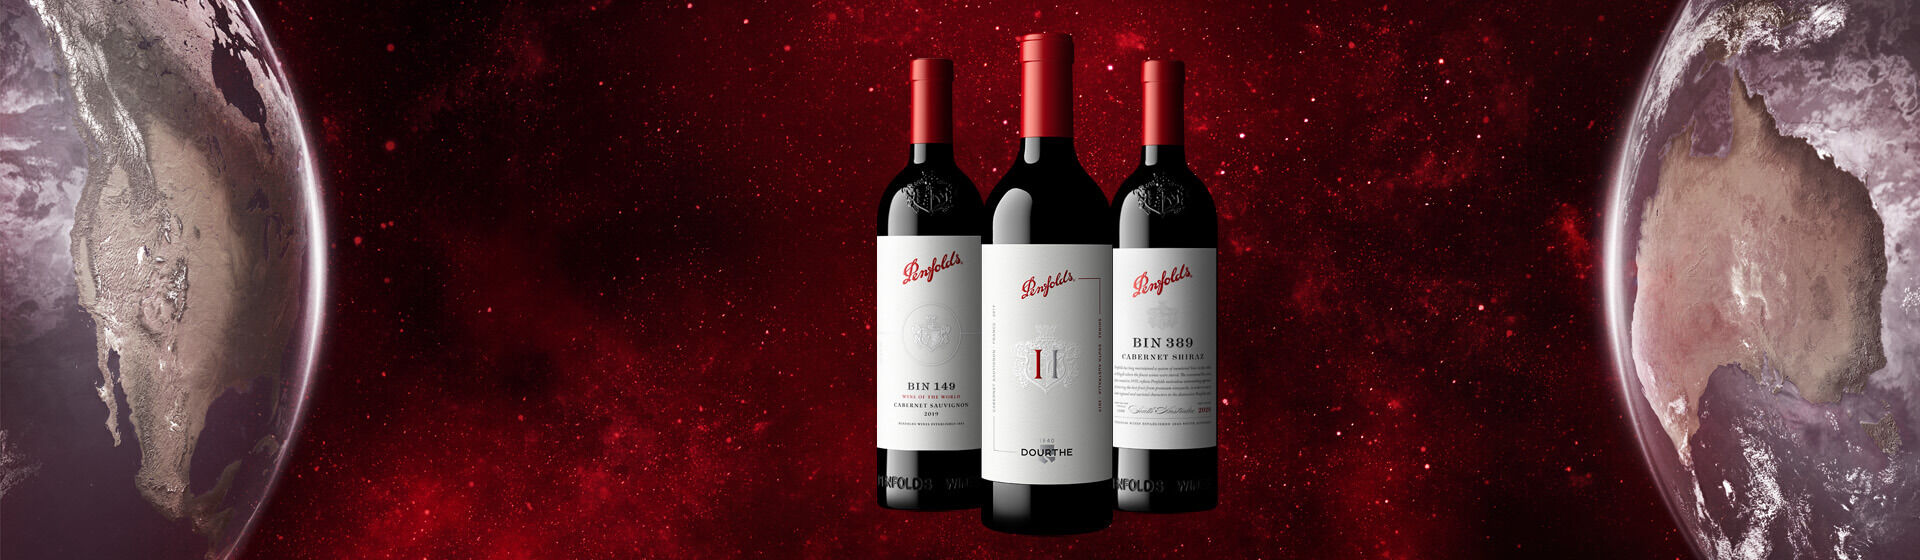 Penfolds Ranges - three Penfolds wine bottles float against a reg galaxy background with a half globe on the left an right